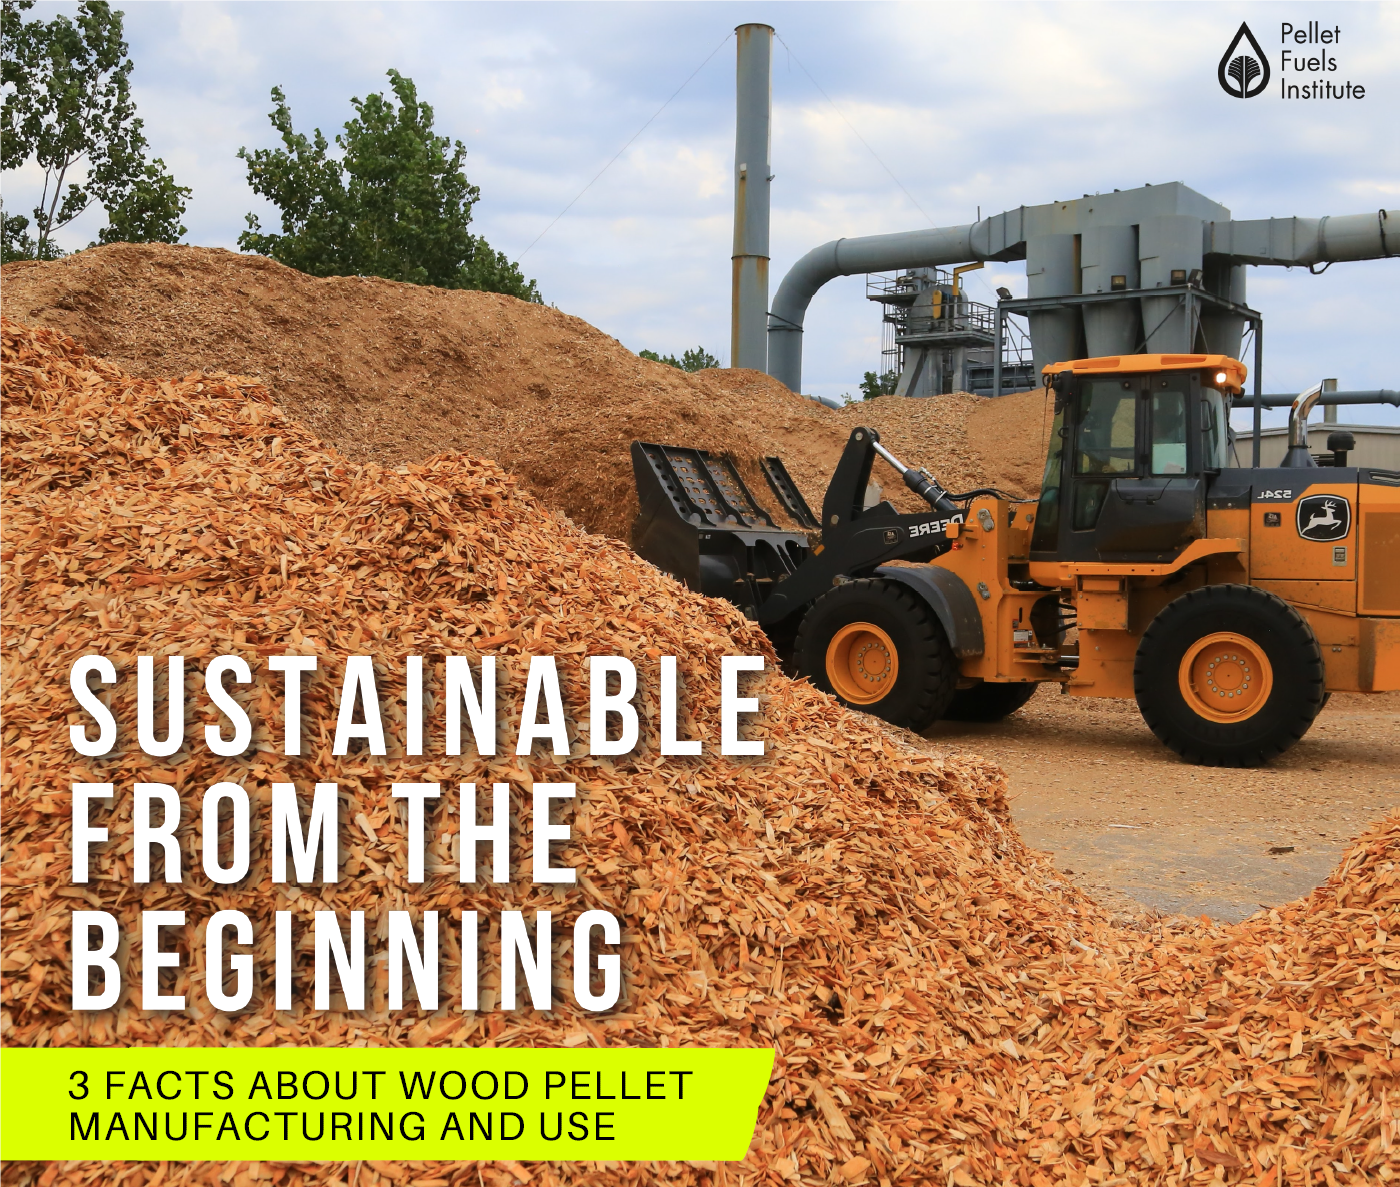 3 facts about wood pellet manufacturing and use